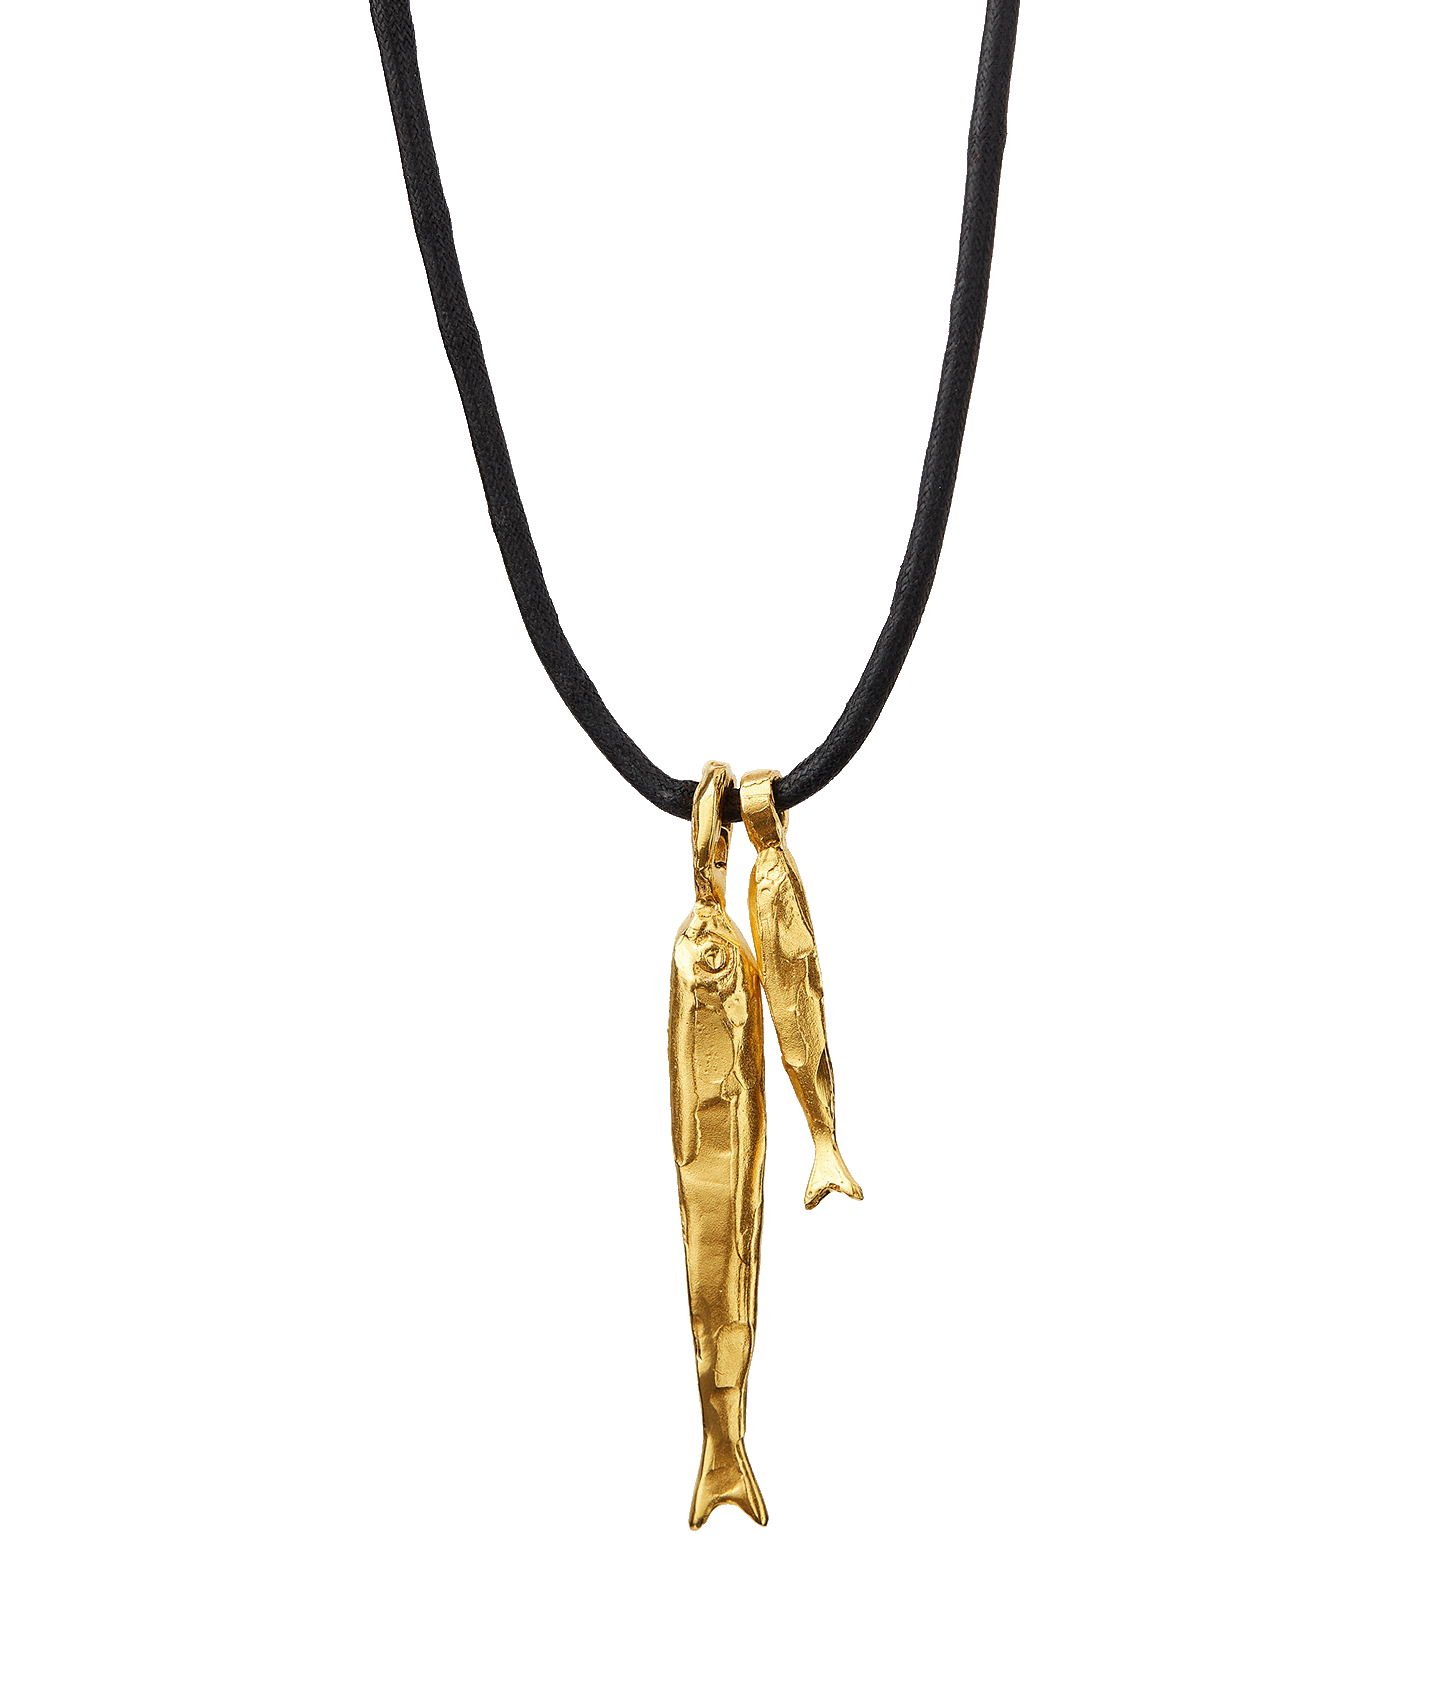 The Gone Fishing Necklace